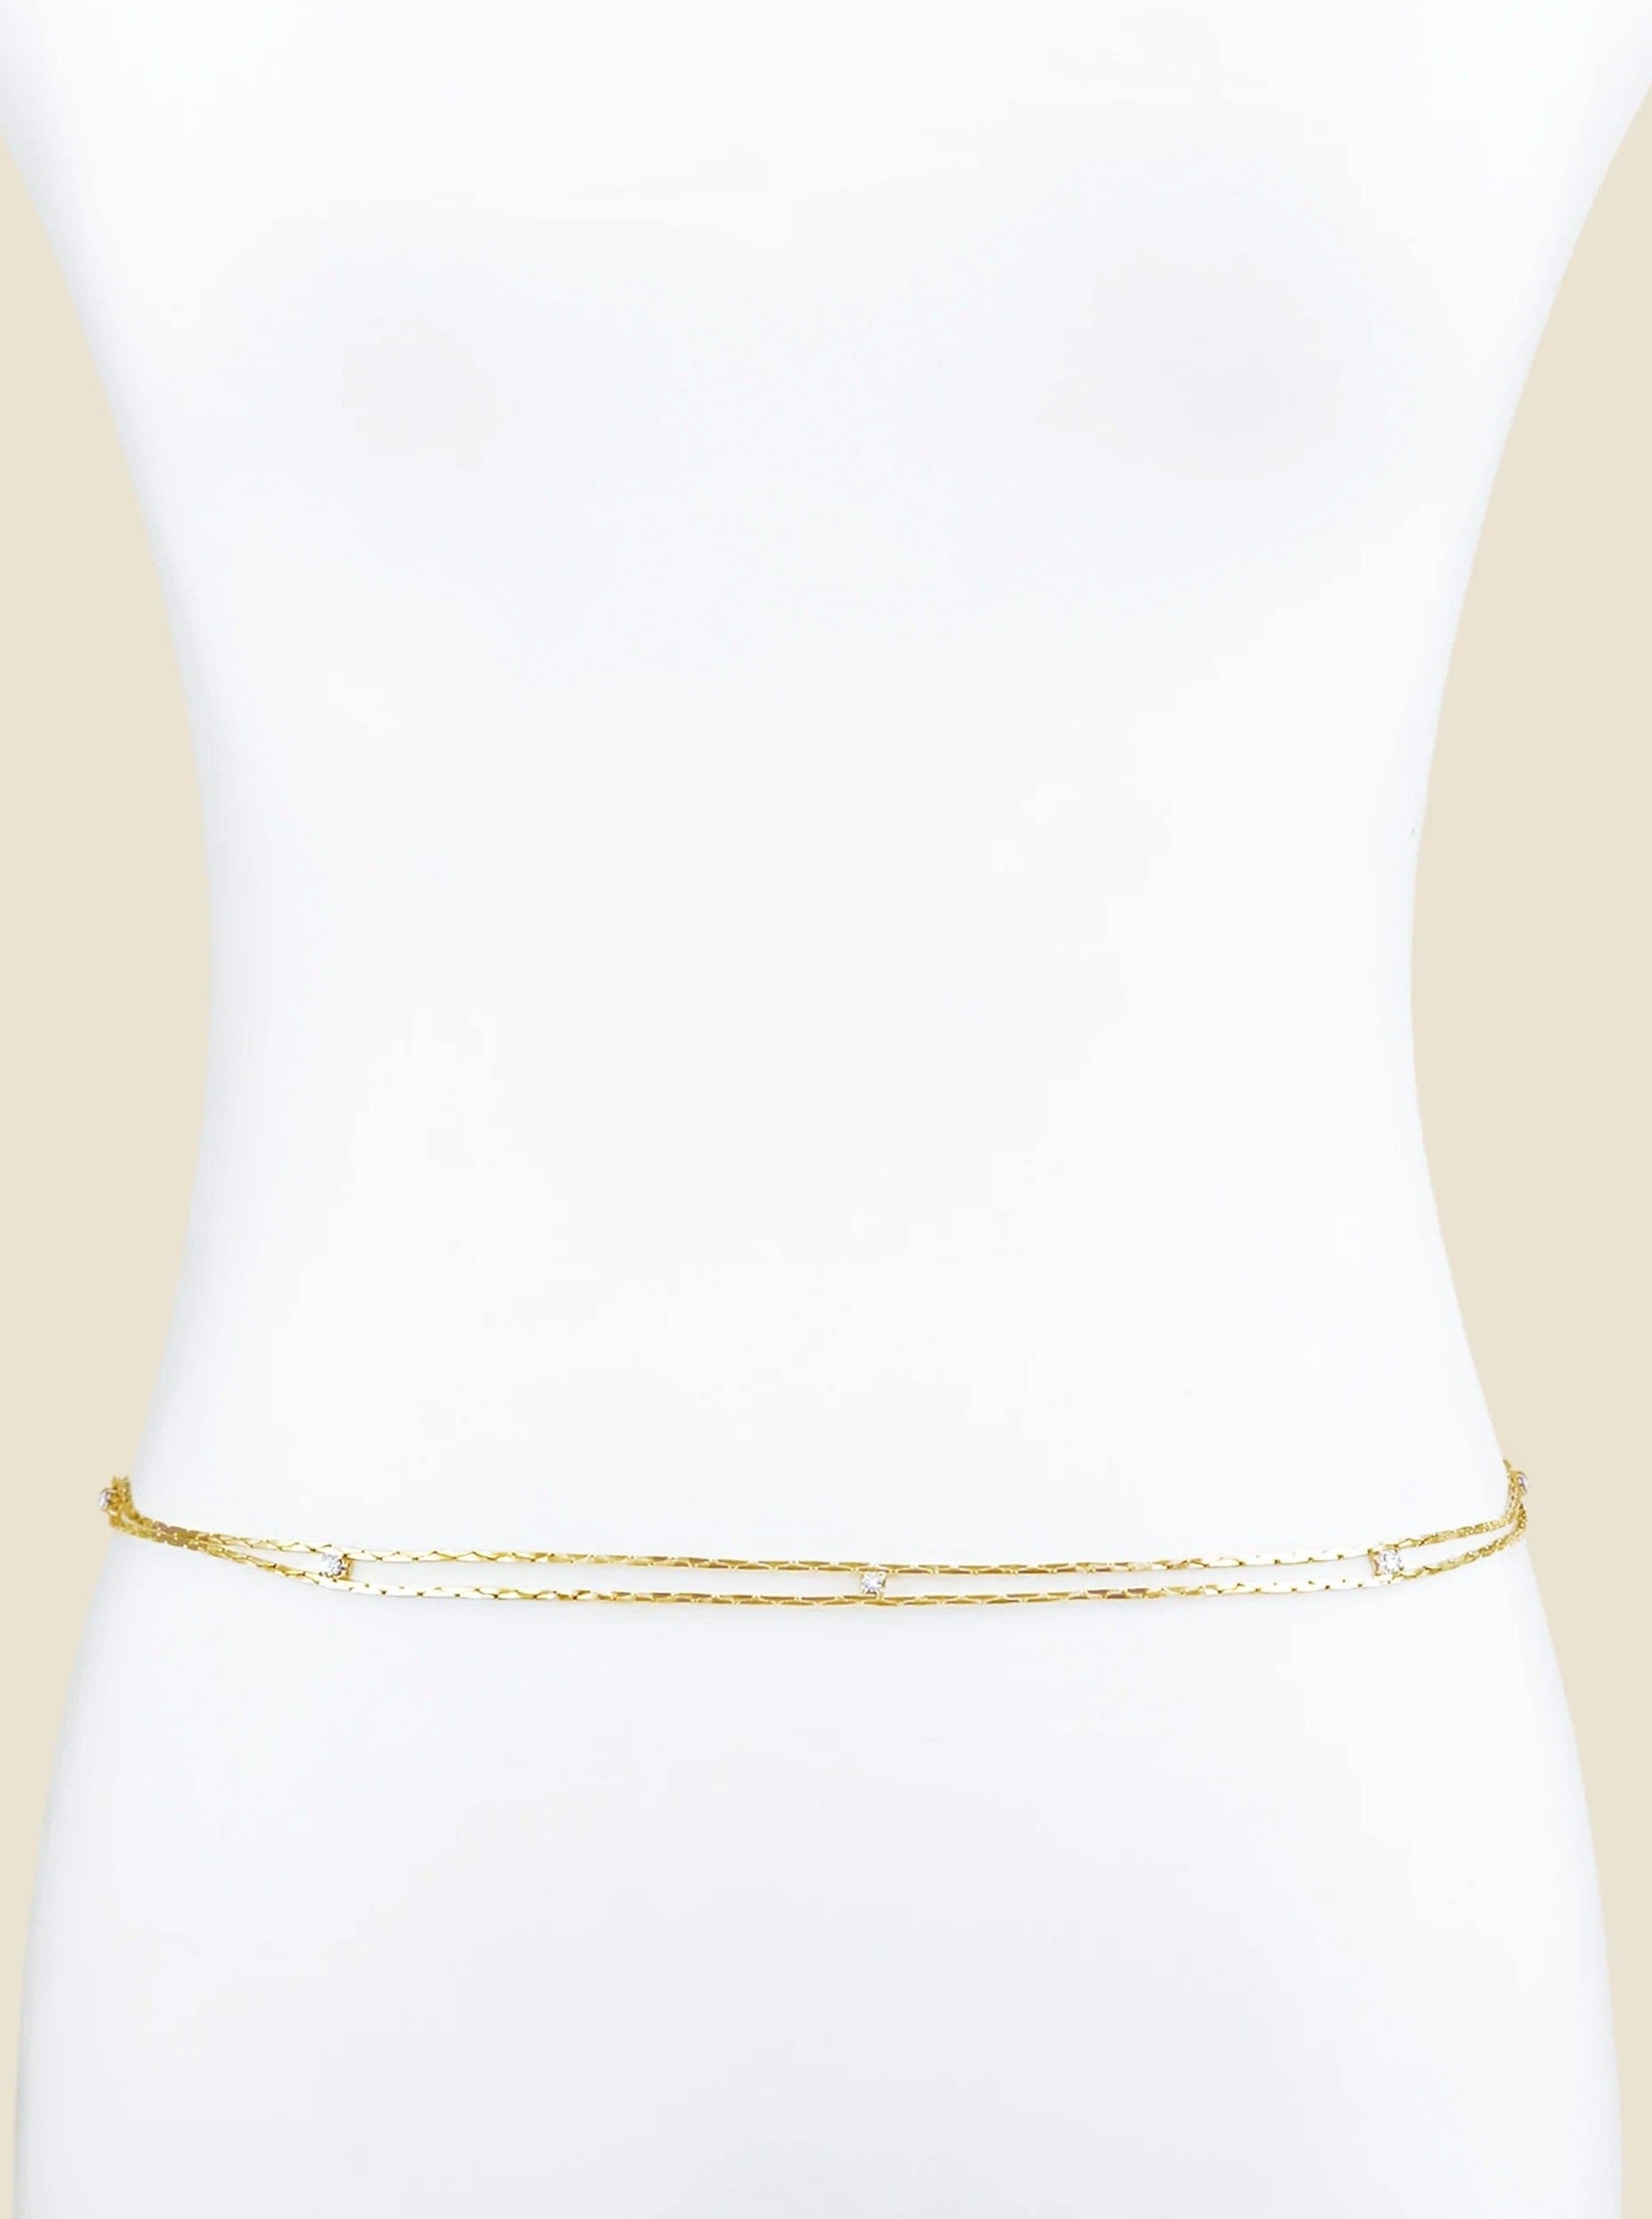 ettika body chain Gold Metal Chain / One Size Adjustable Always Relevant Gold Belt with Crystals // WAIST CHAIN